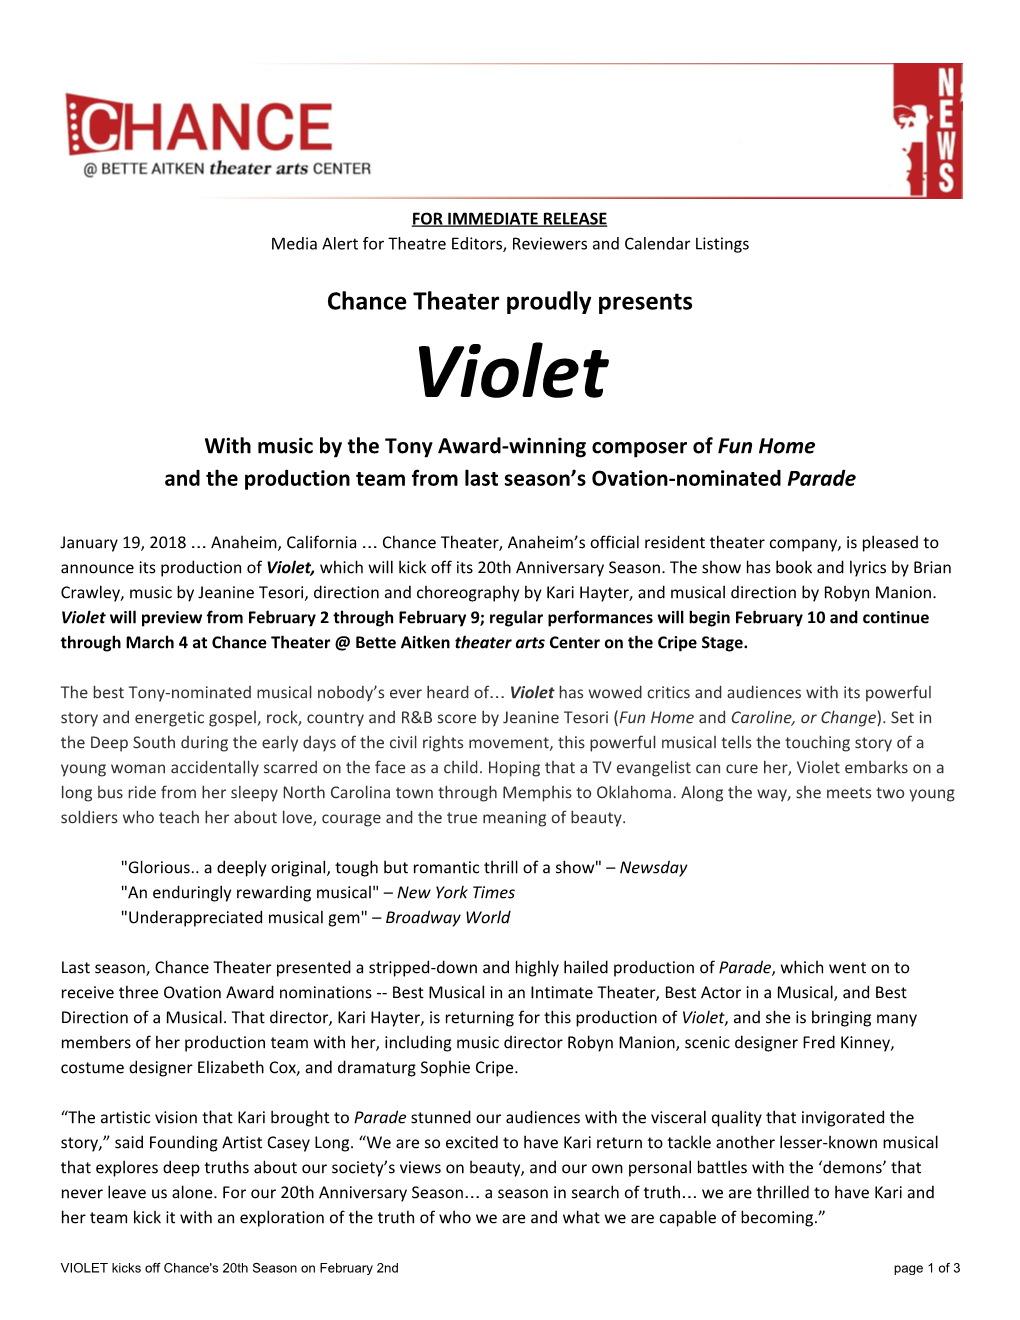 Violet with Music by the Tony Award-Winning Composer of Fun Home ​ and the Production Team from Last Season’S Ovation-Nominated Parade ​